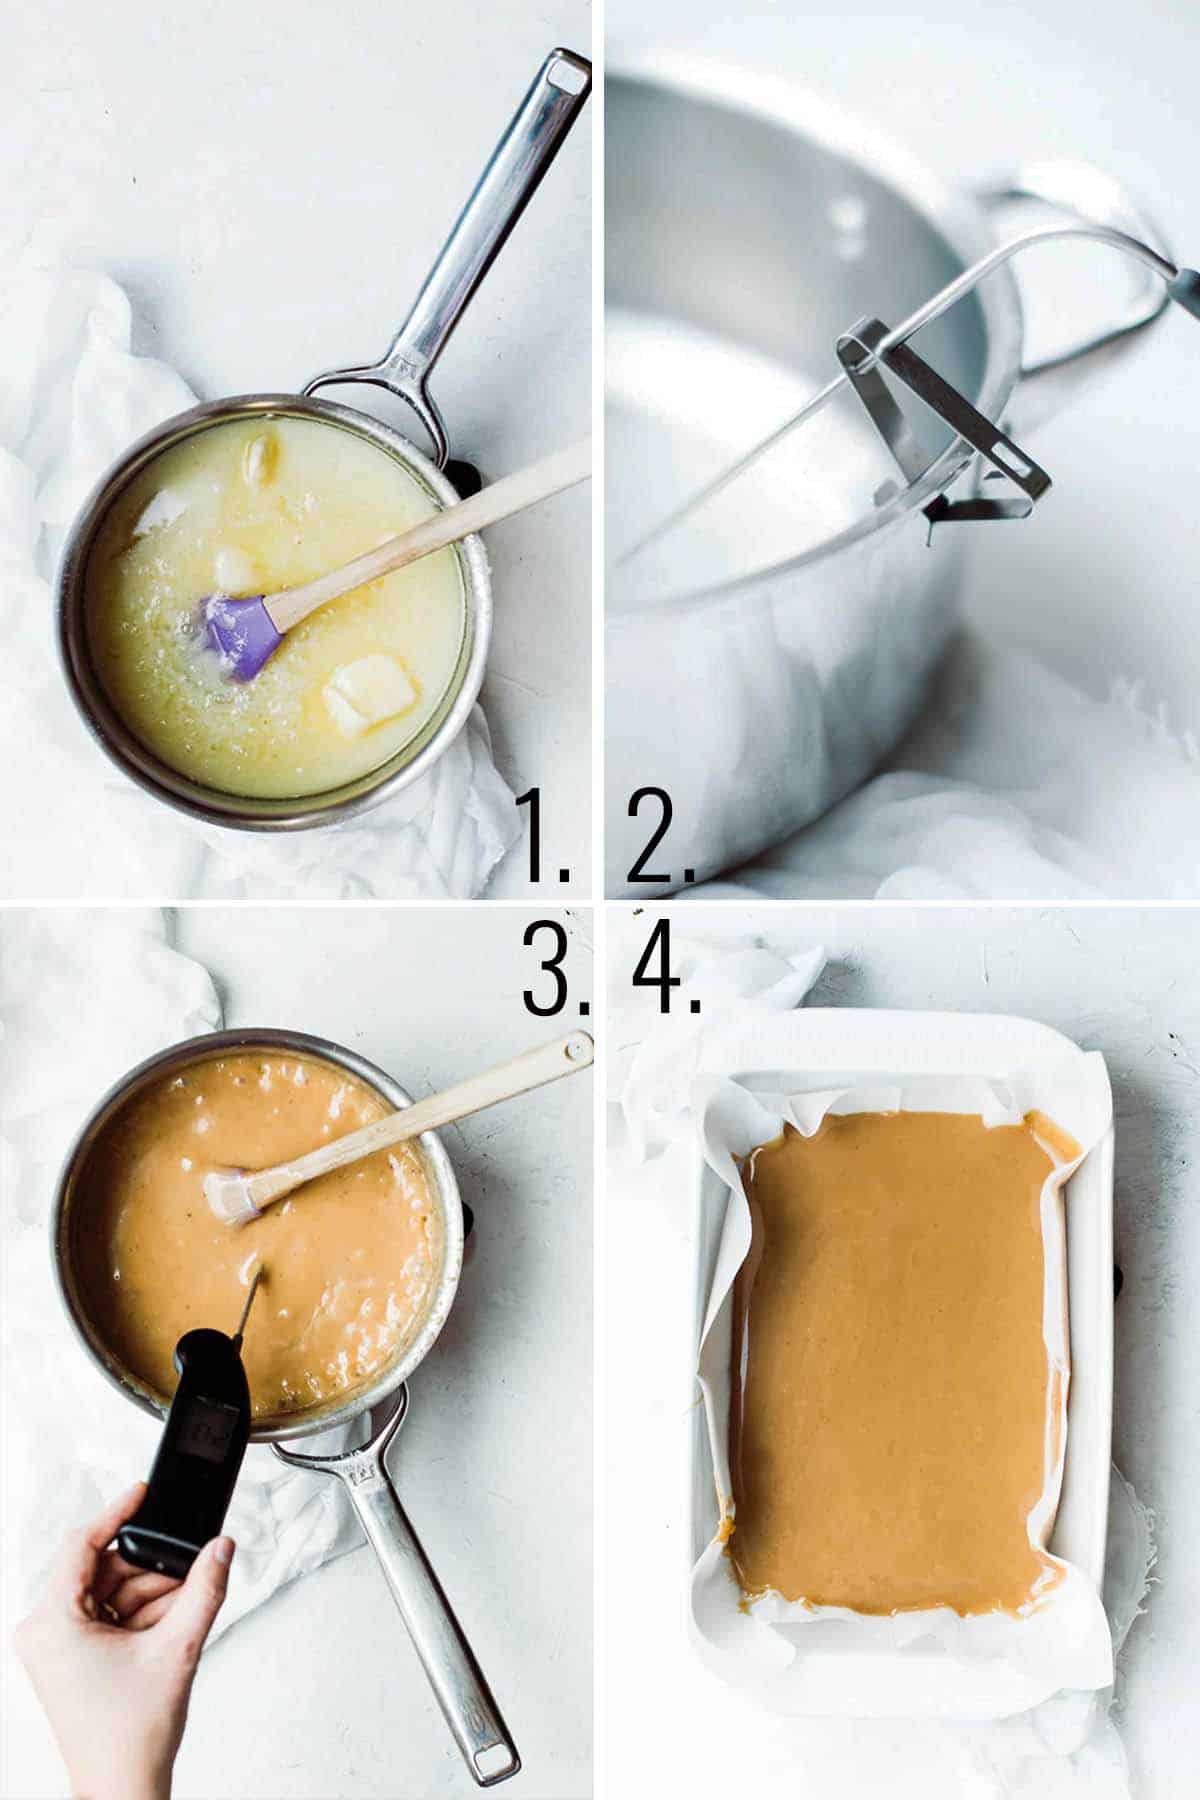 Collage of images showing how to make sea salt caramels.